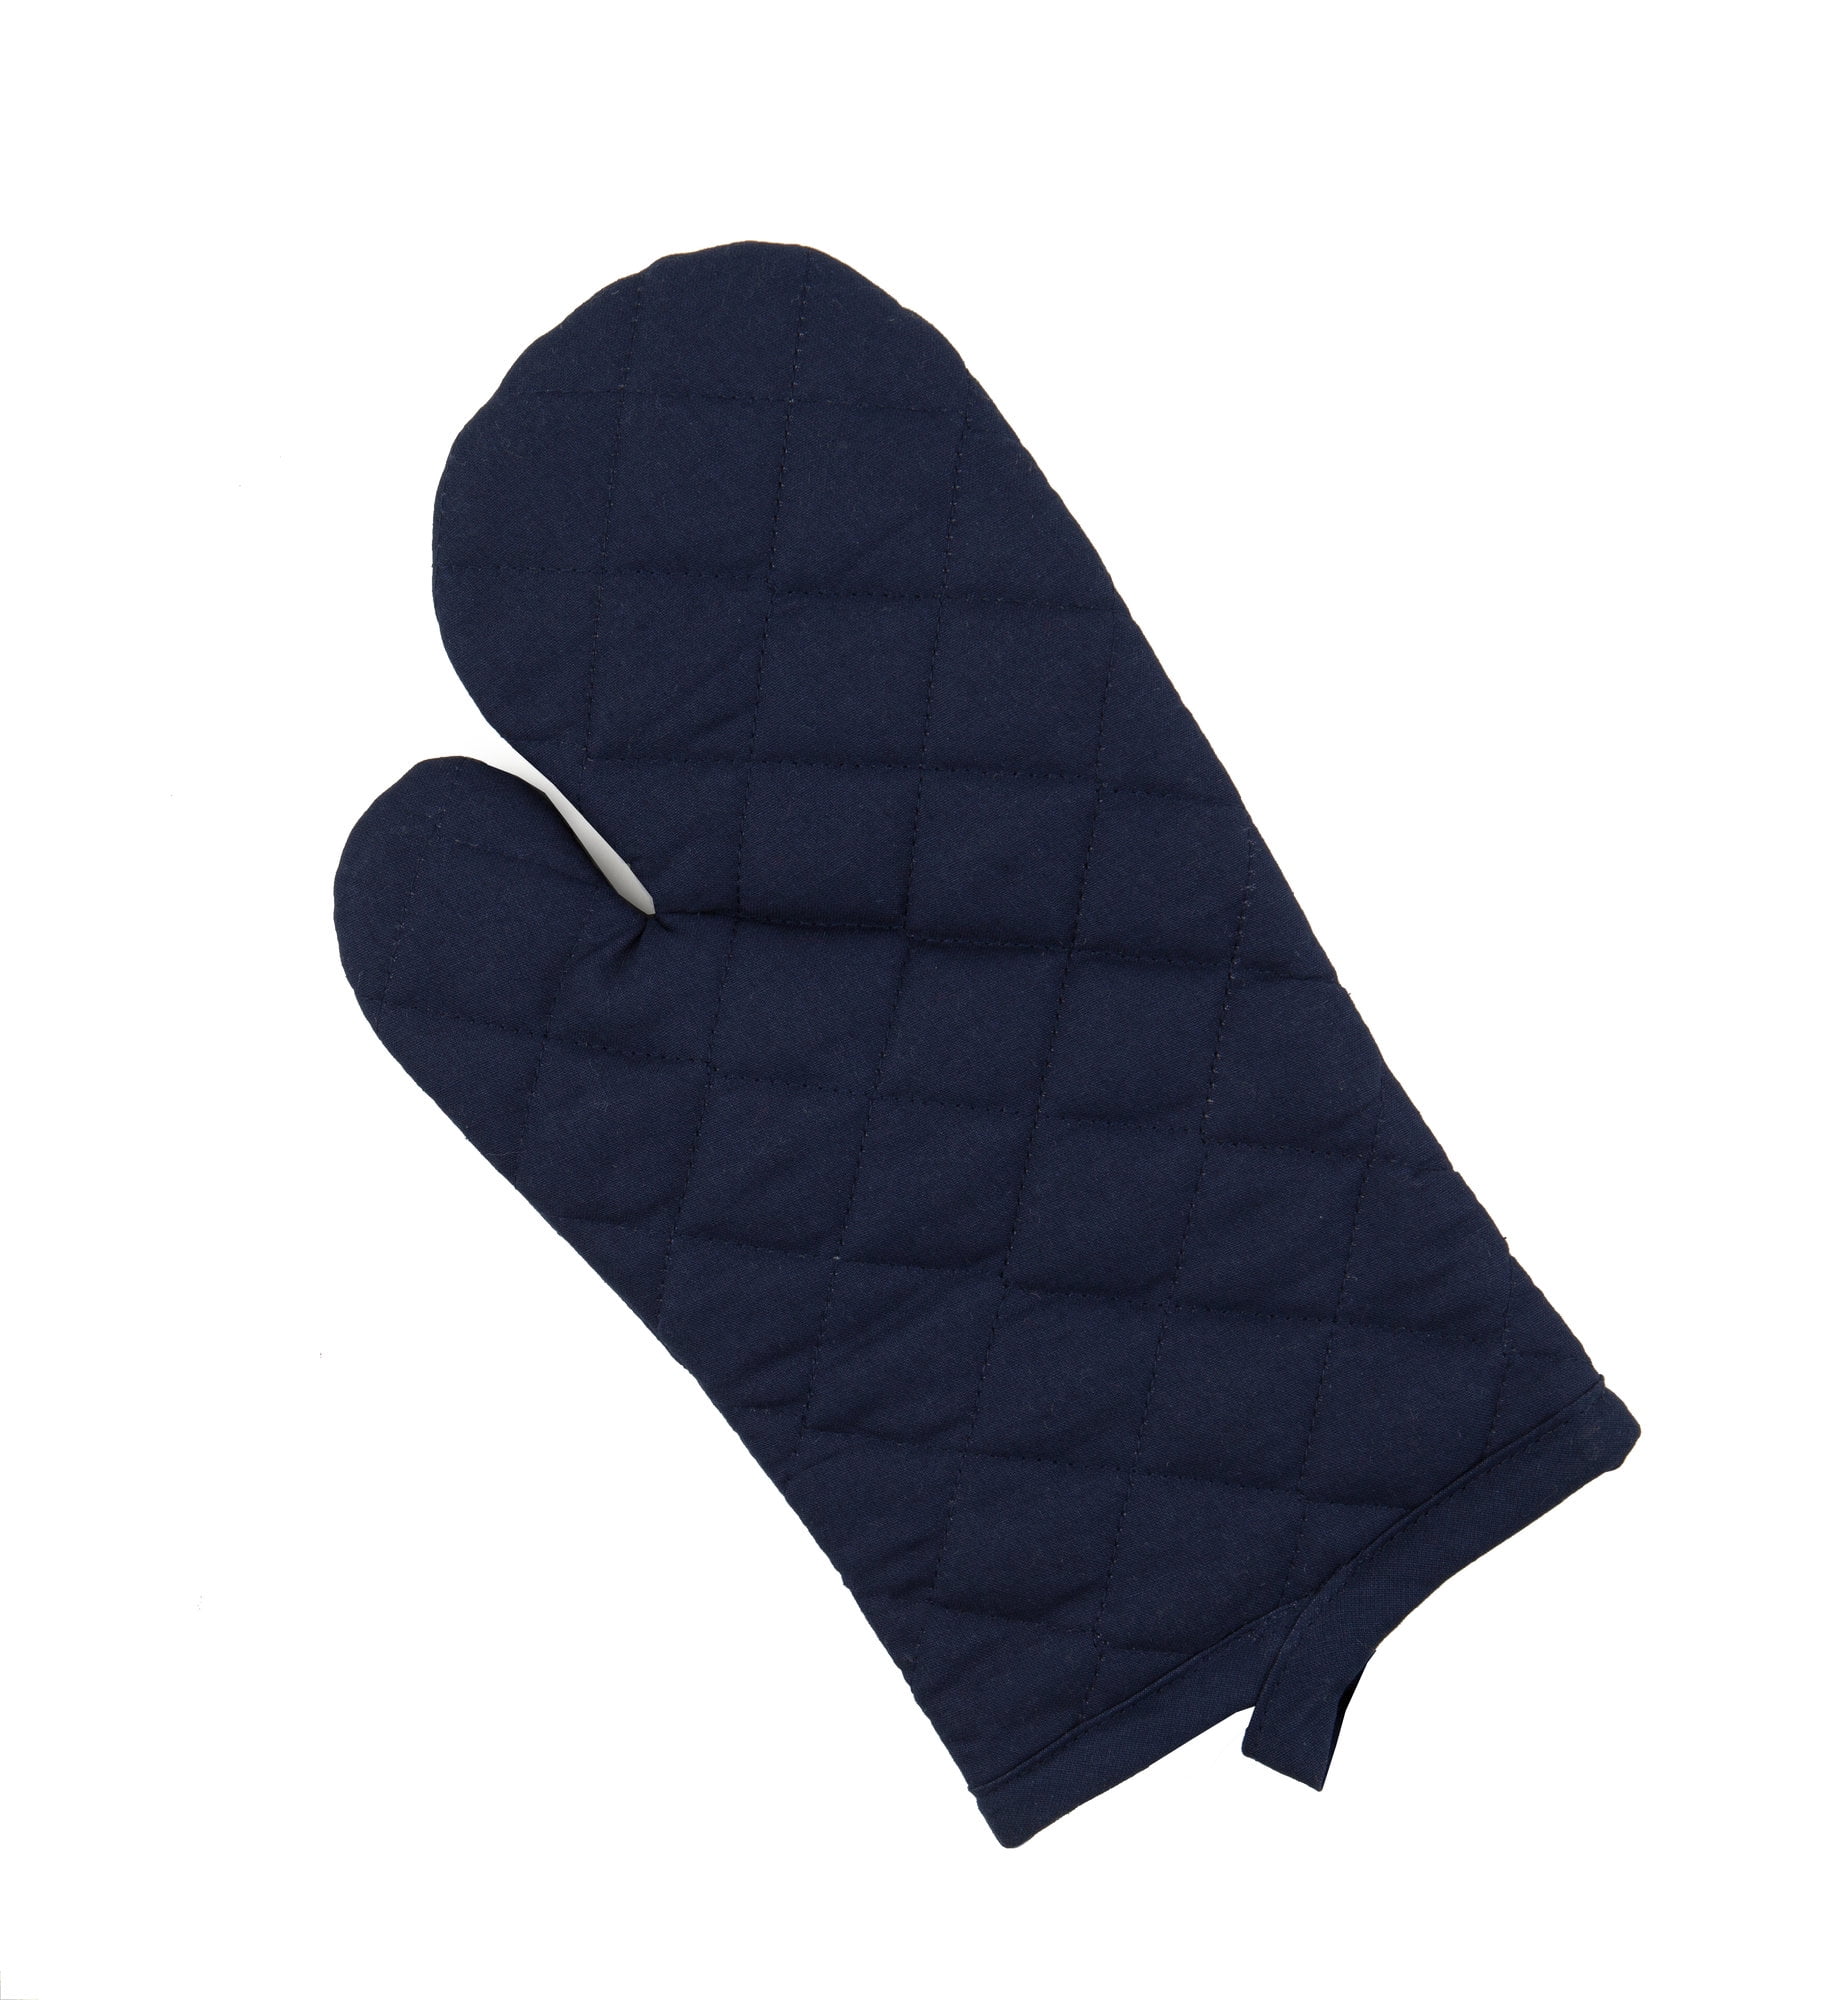 3 Pc~ NAVY BLUE Pot Holders And Oven Mitt Free Shipping